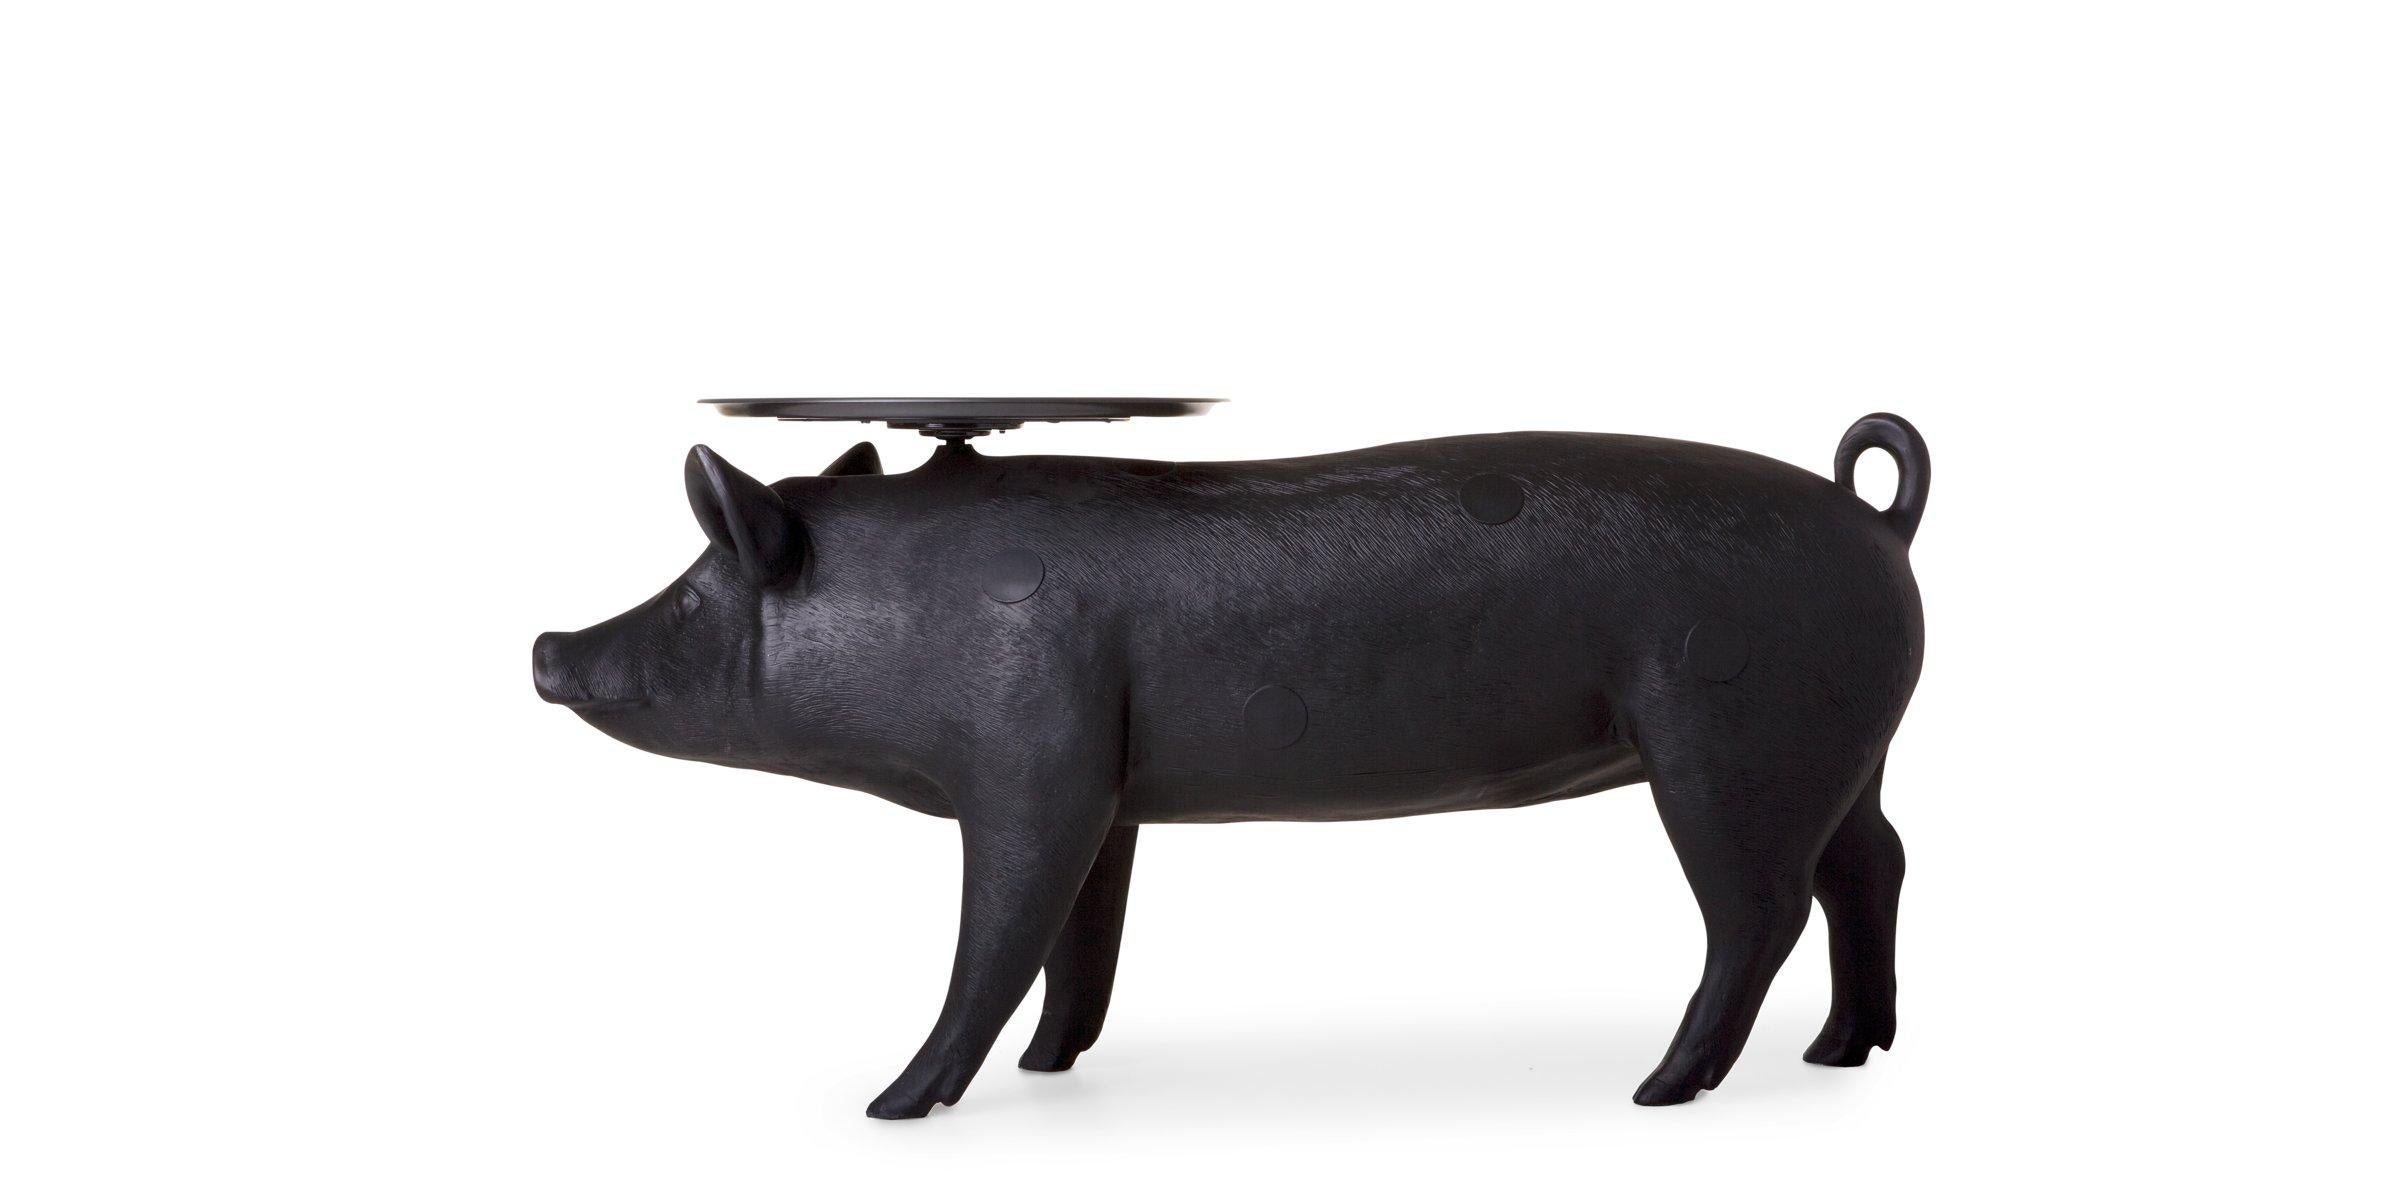 Oink, oink! Meet the Pig Table: the table that thinks it’s a pig. This proud big girl certainly didn’t buy her hospitality license at the corner store — she definitely knows what she’s doing. Isn’t she extraordinarily adorable?

Additional